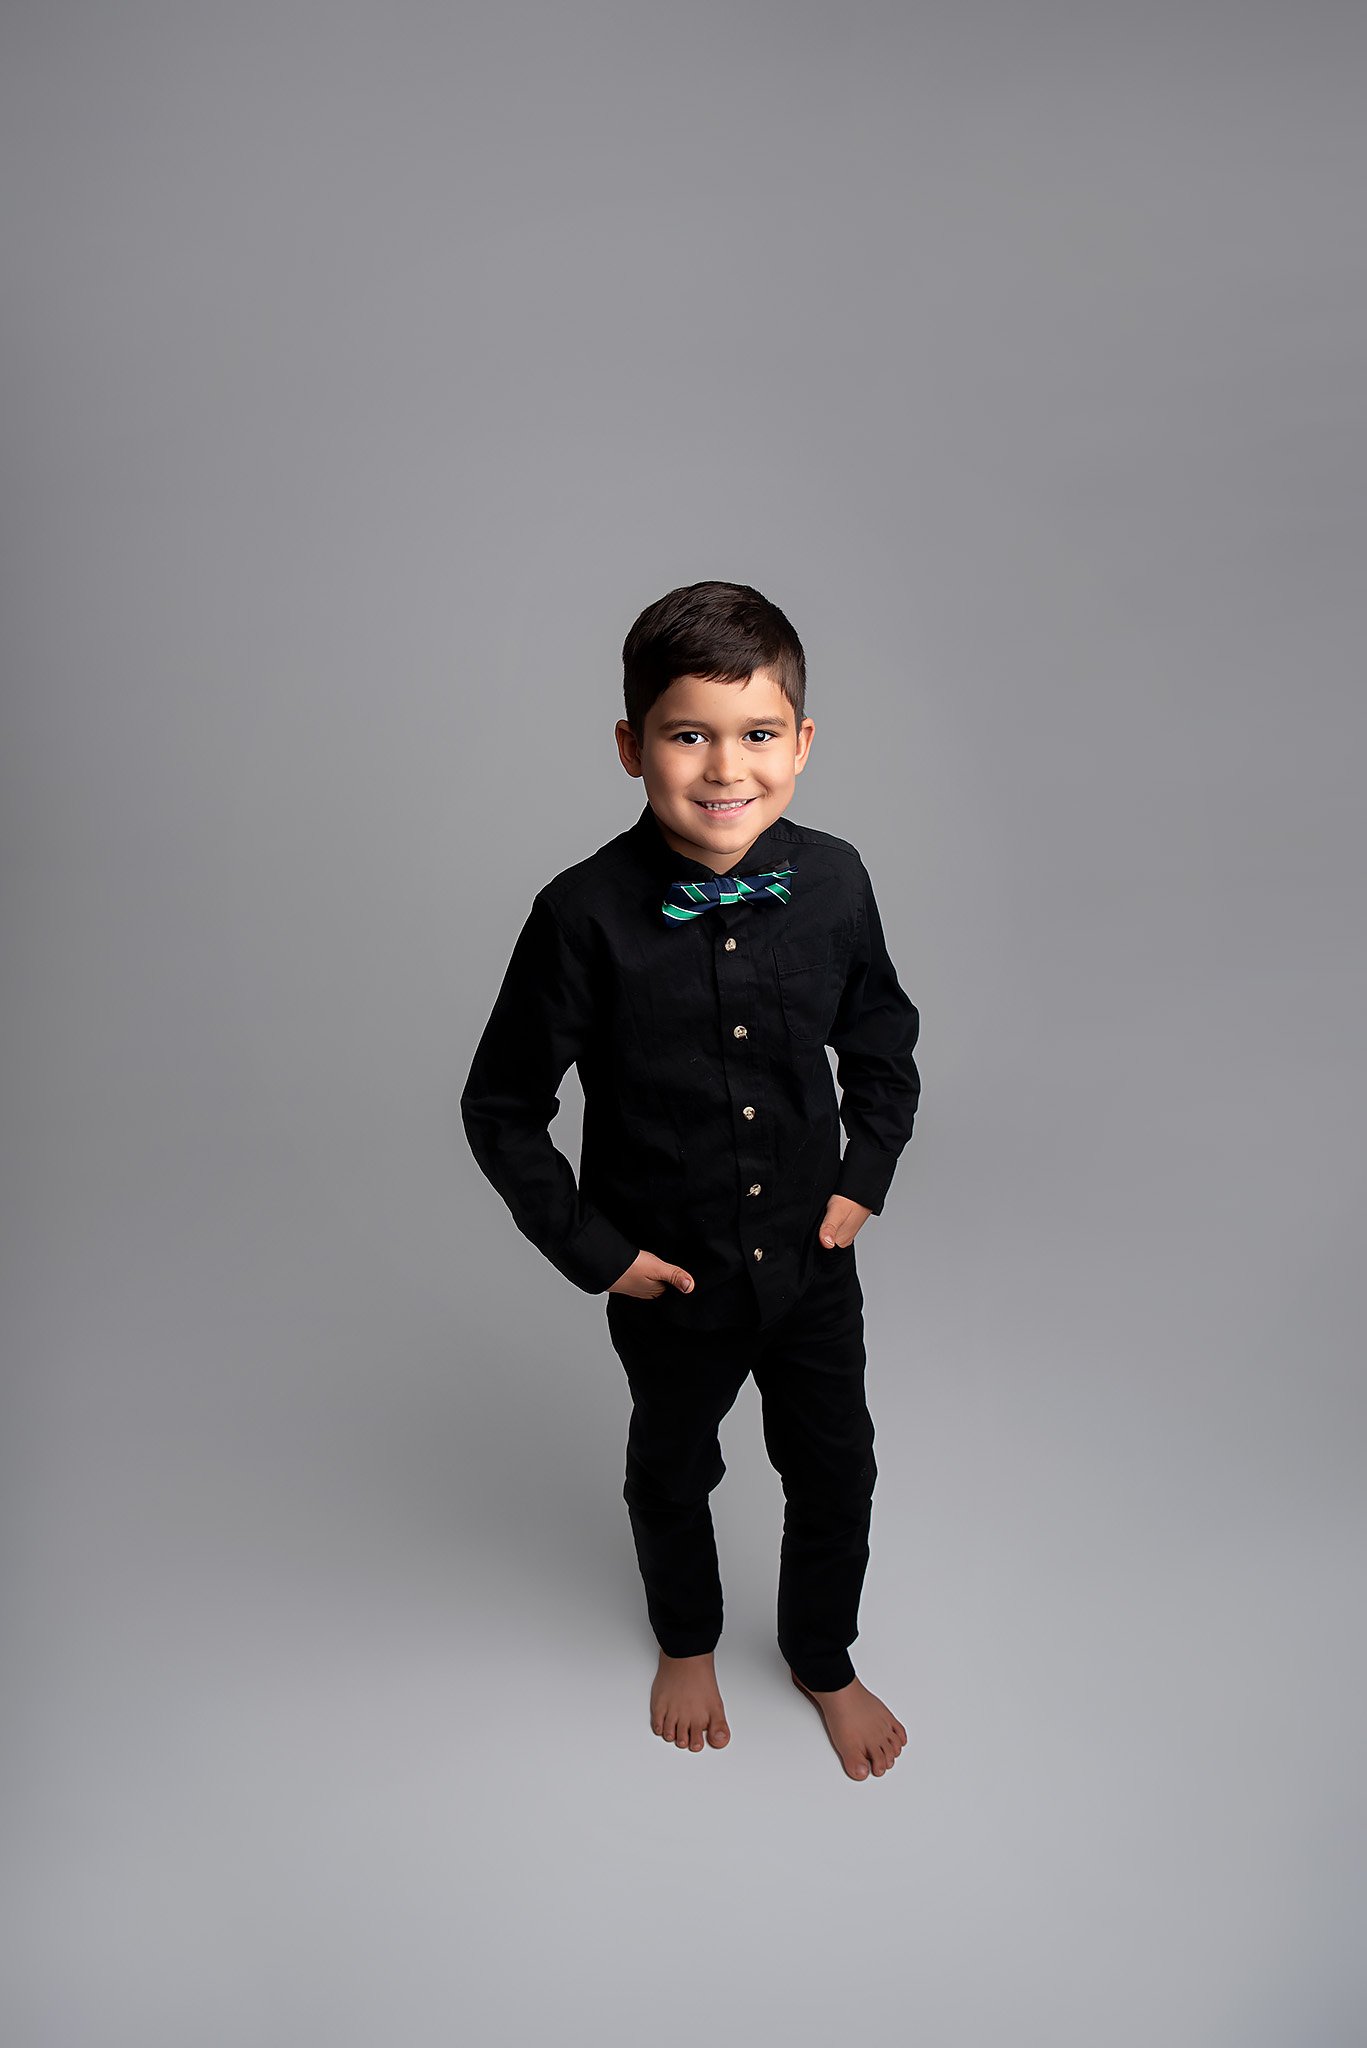 little-boy-wearing-black-outfit-and-bow-tie.jpg